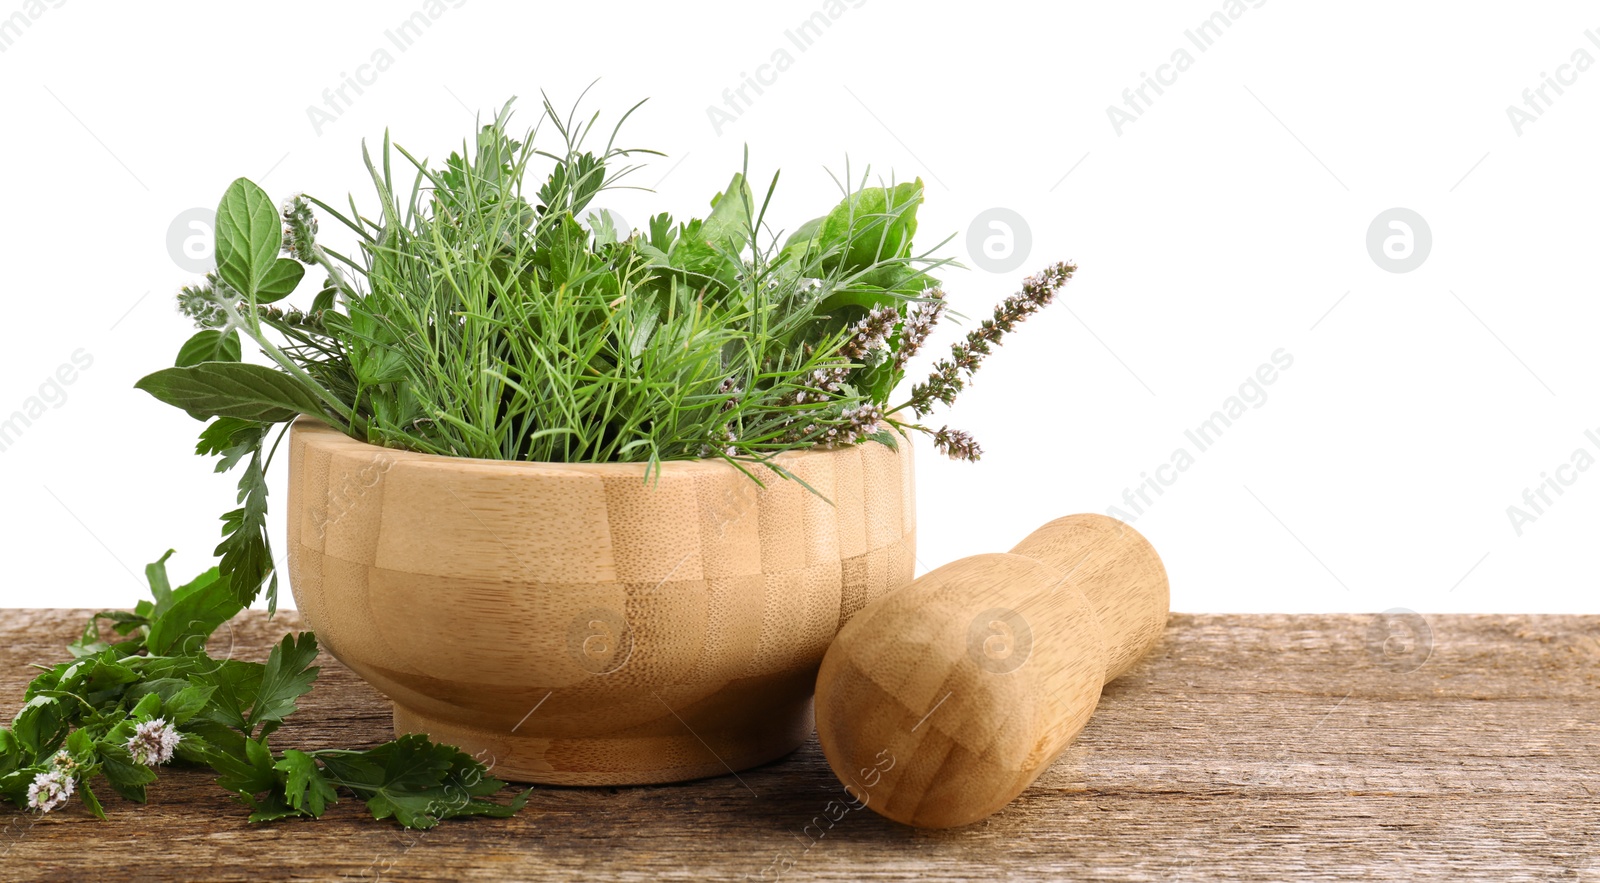 Photo of Mortar, pestle and different herbs on wooden table against white background